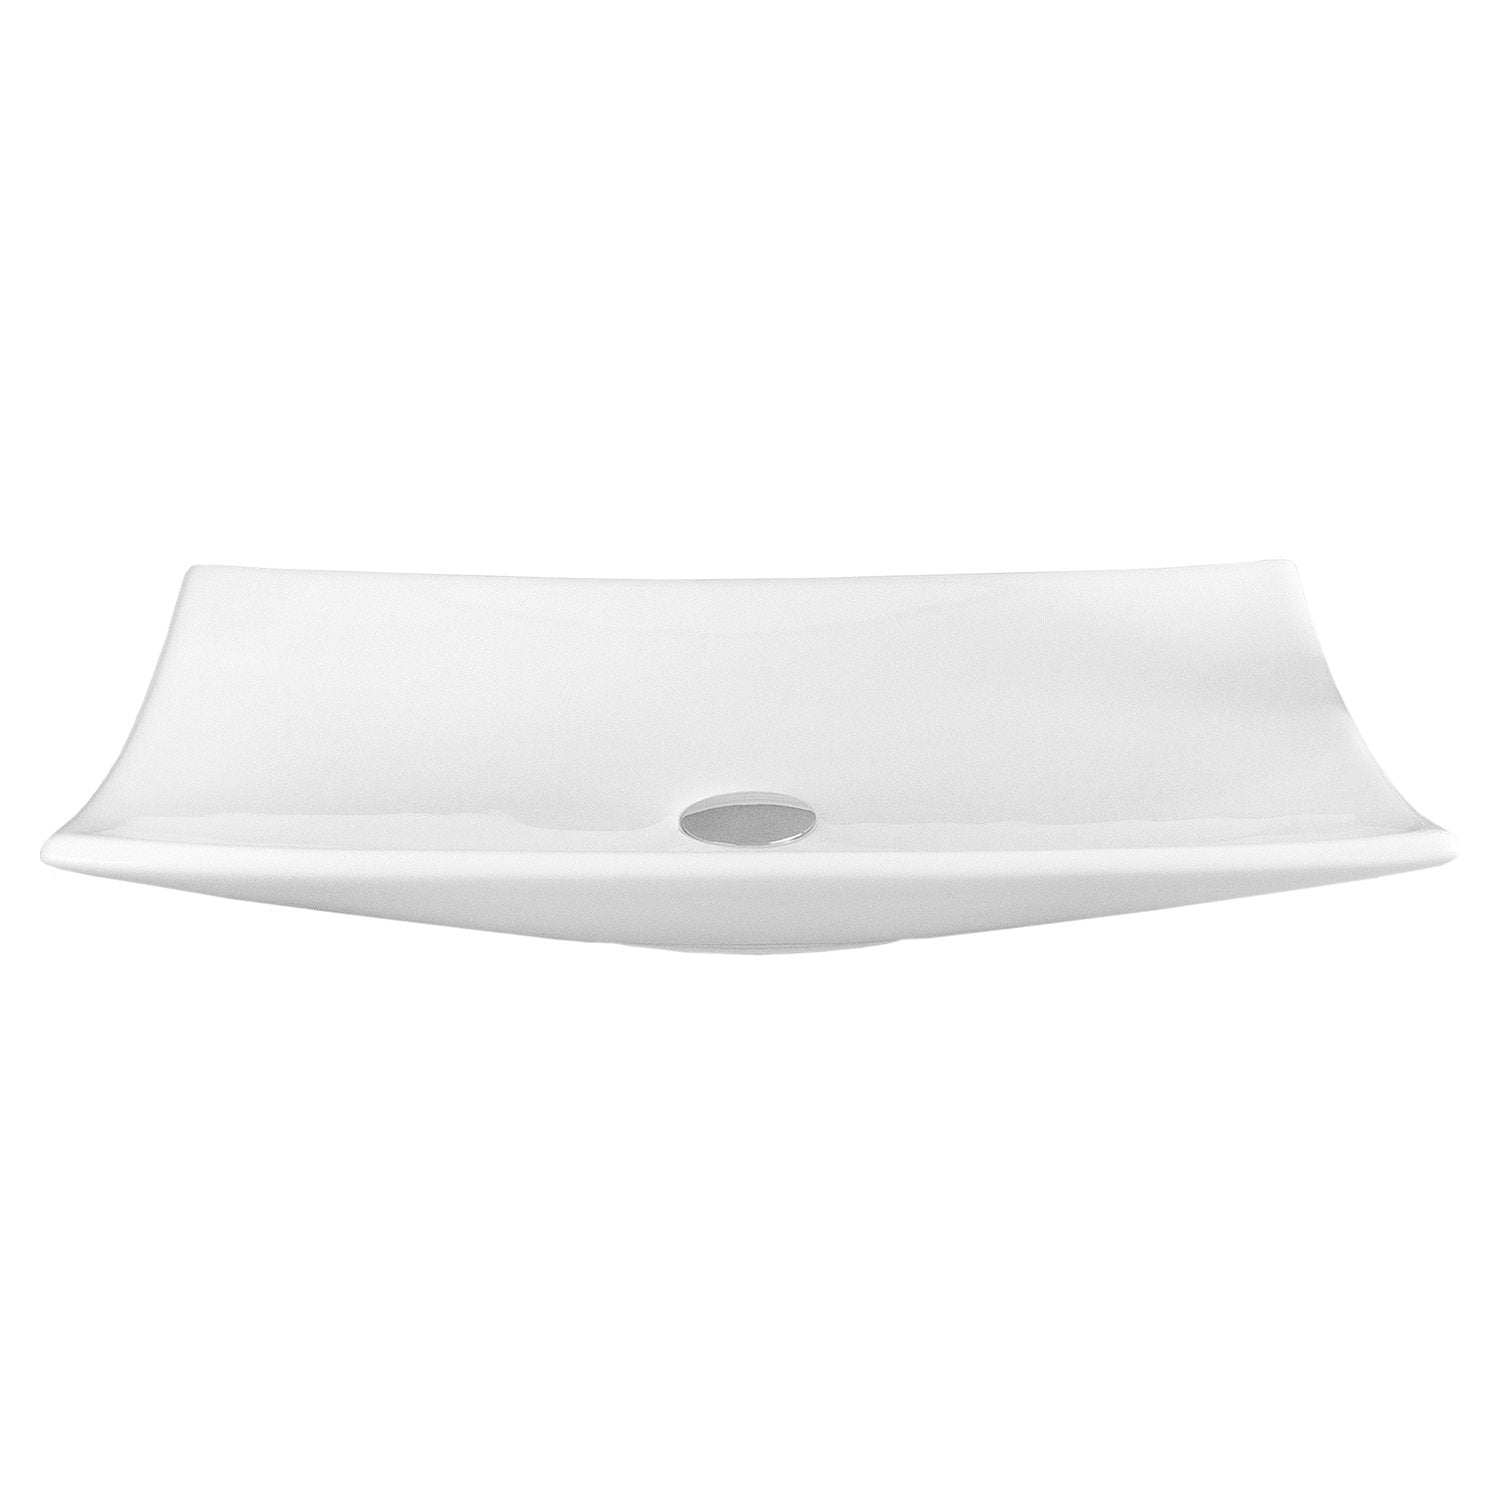 DAX Ceramic Rectangle Single Bowl Bathroom Vessel Sink, White Finish, 23-3/4 x 15-3/8 x 4-1/2 Inches (BSN-CL1056)